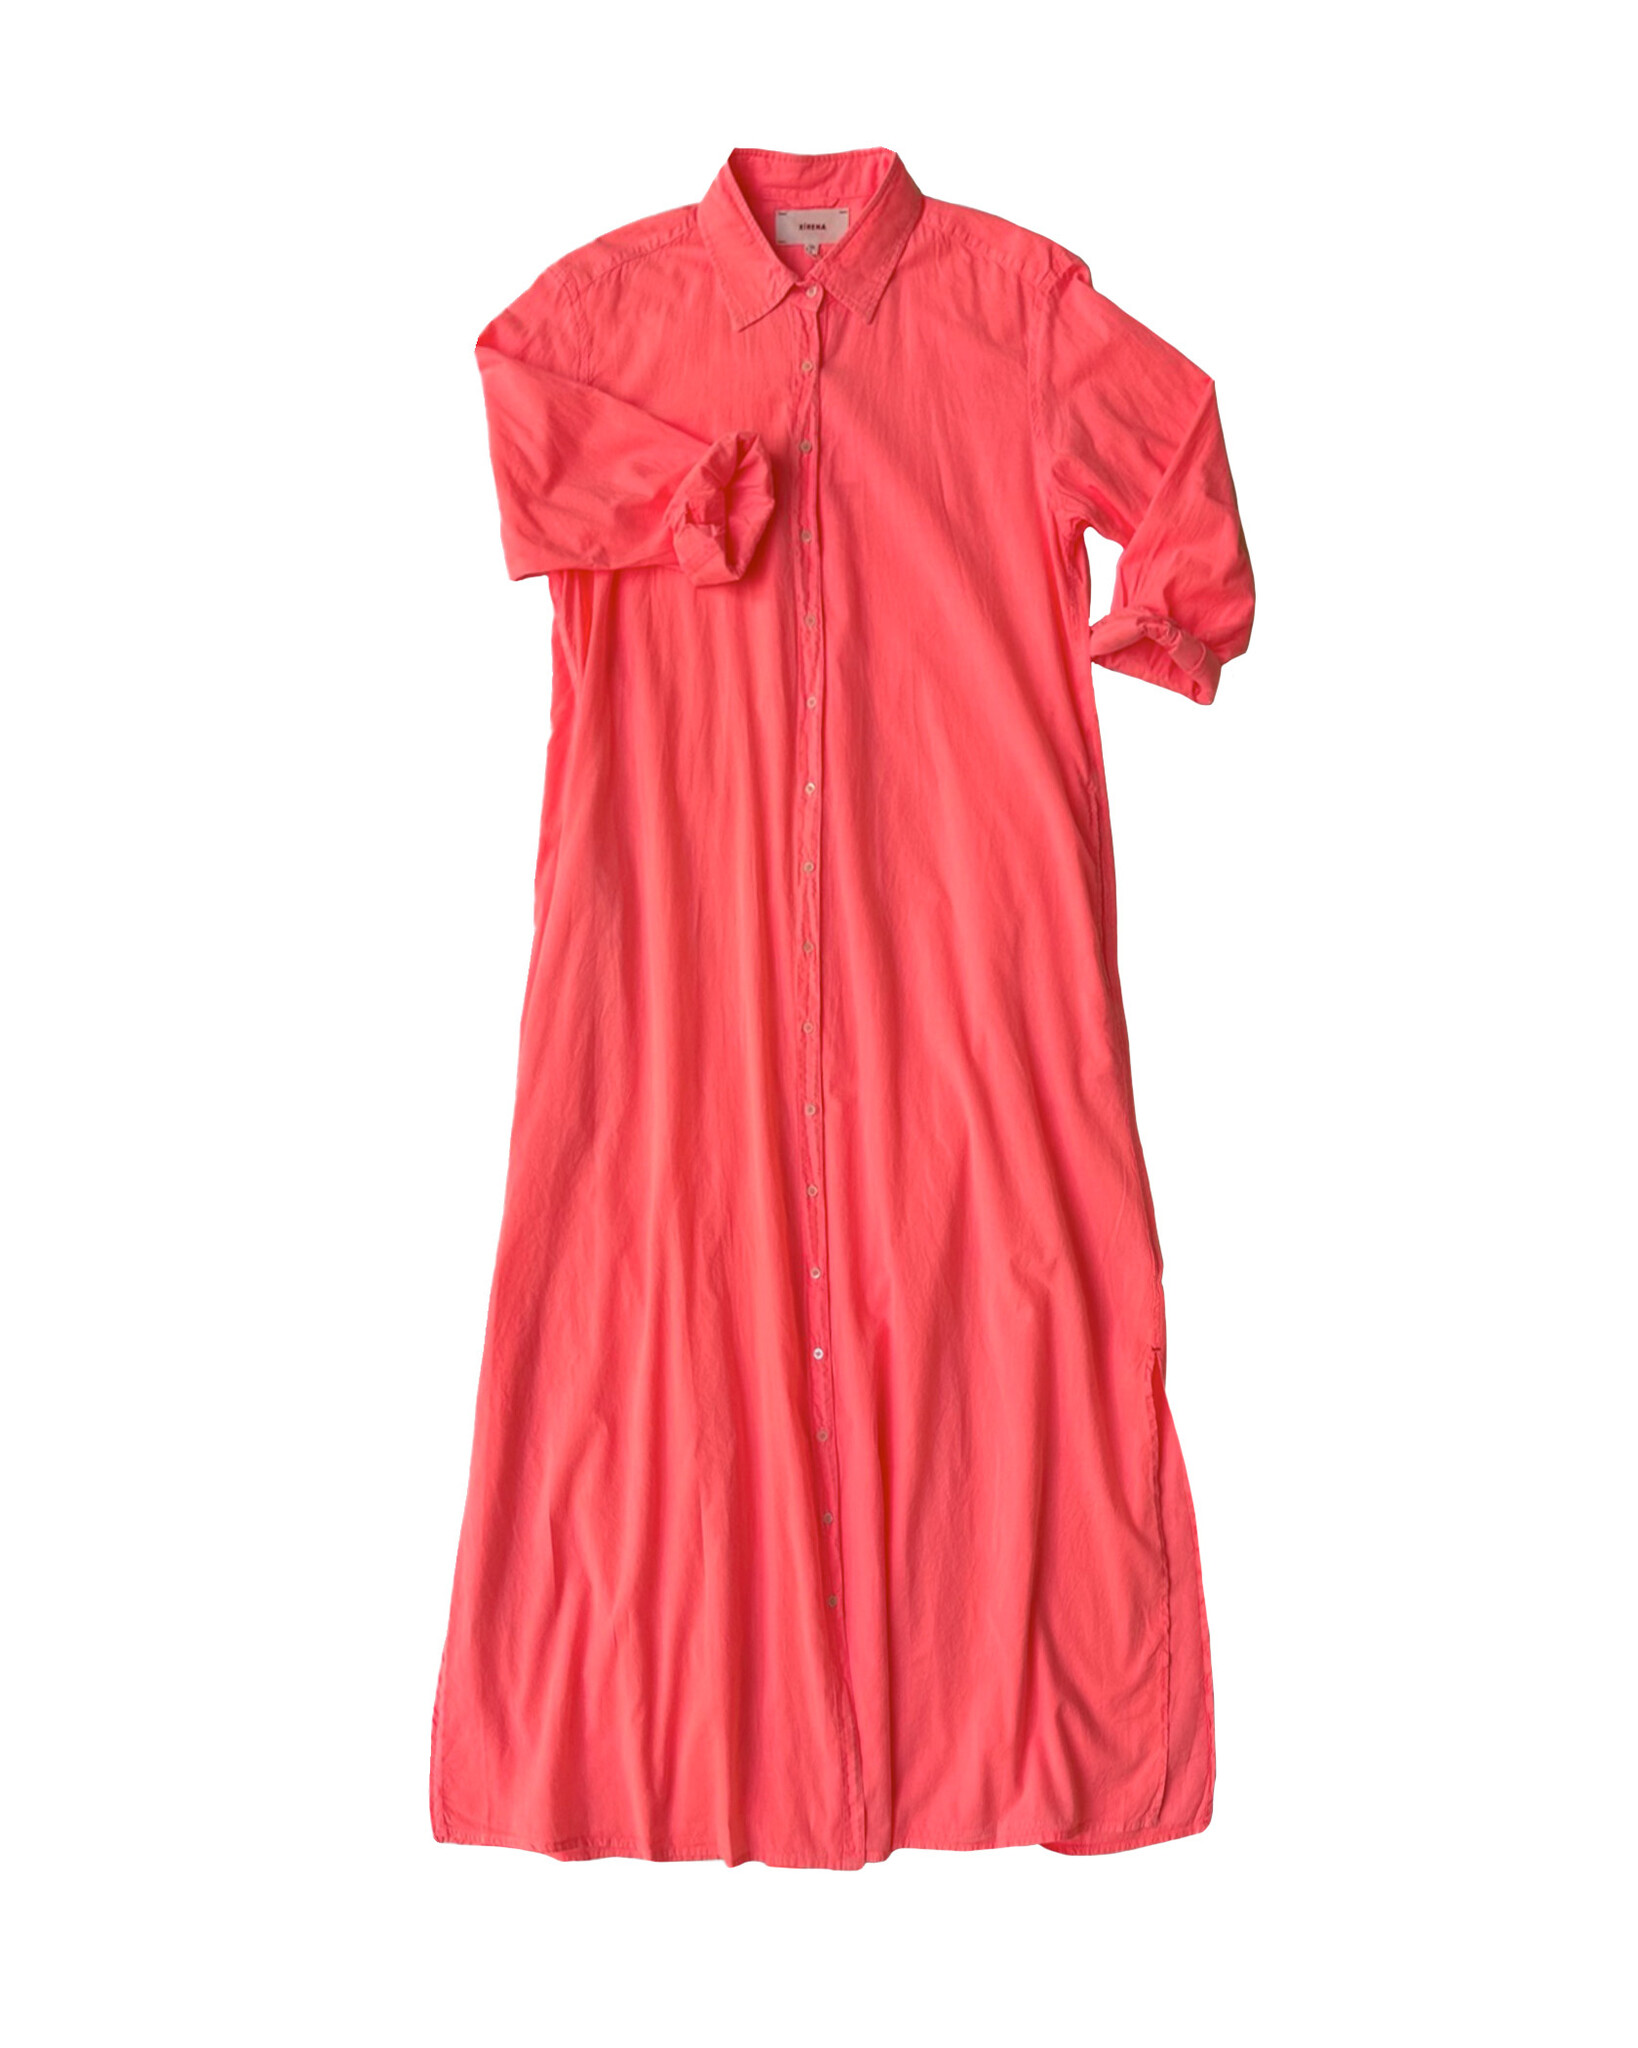 XIRENA Women's Boden Dress, Punch, Red, XS at  Women's Clothing store